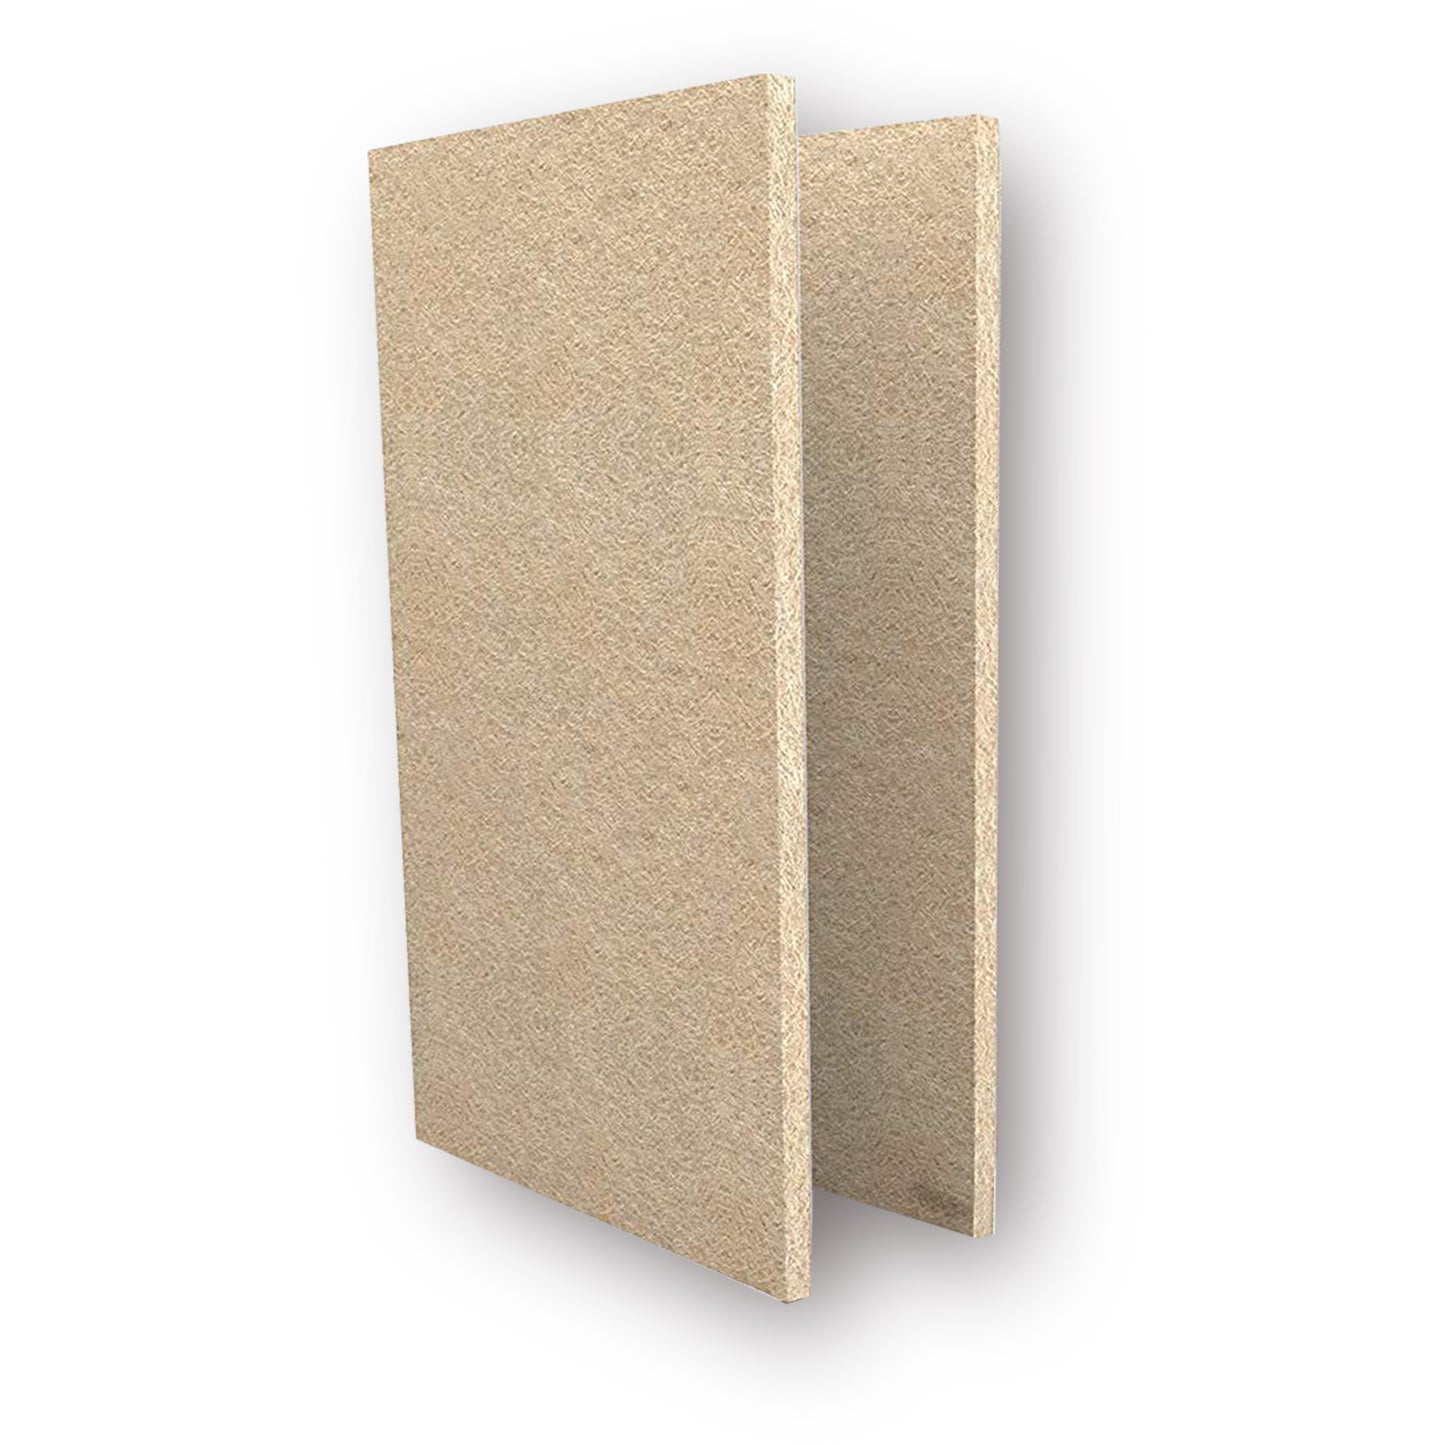 Chair Leg Floor Protectors Furniture Felt Pads Beige and Brown Extra Large Sheets 30 x 21 cm Hardwood Floor Protector 5mm thick